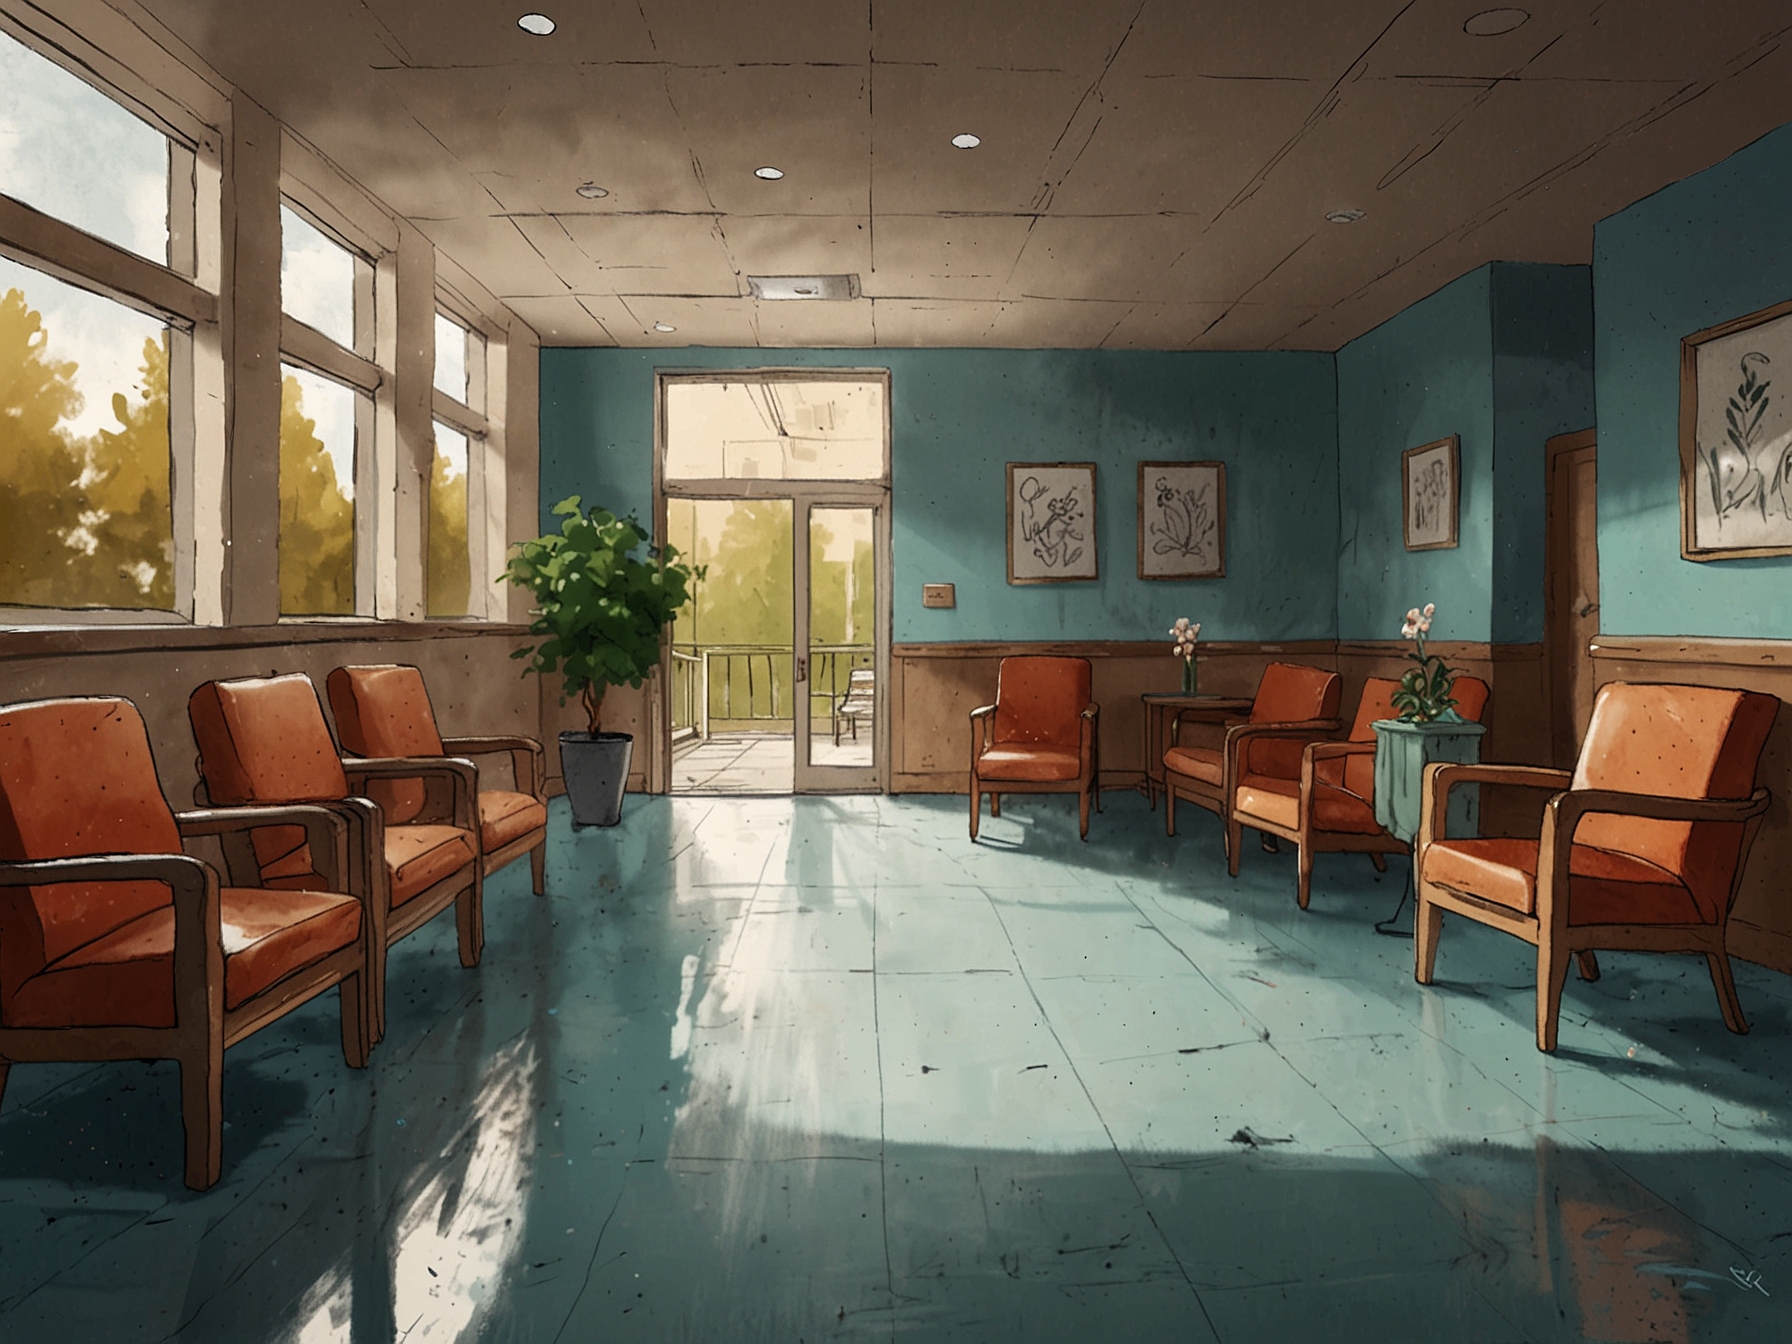 A compassionate healthcare setting with separate waiting areas for grieving parents, depicting the need for empathetic environments to support those who have experienced pregnancy loss.